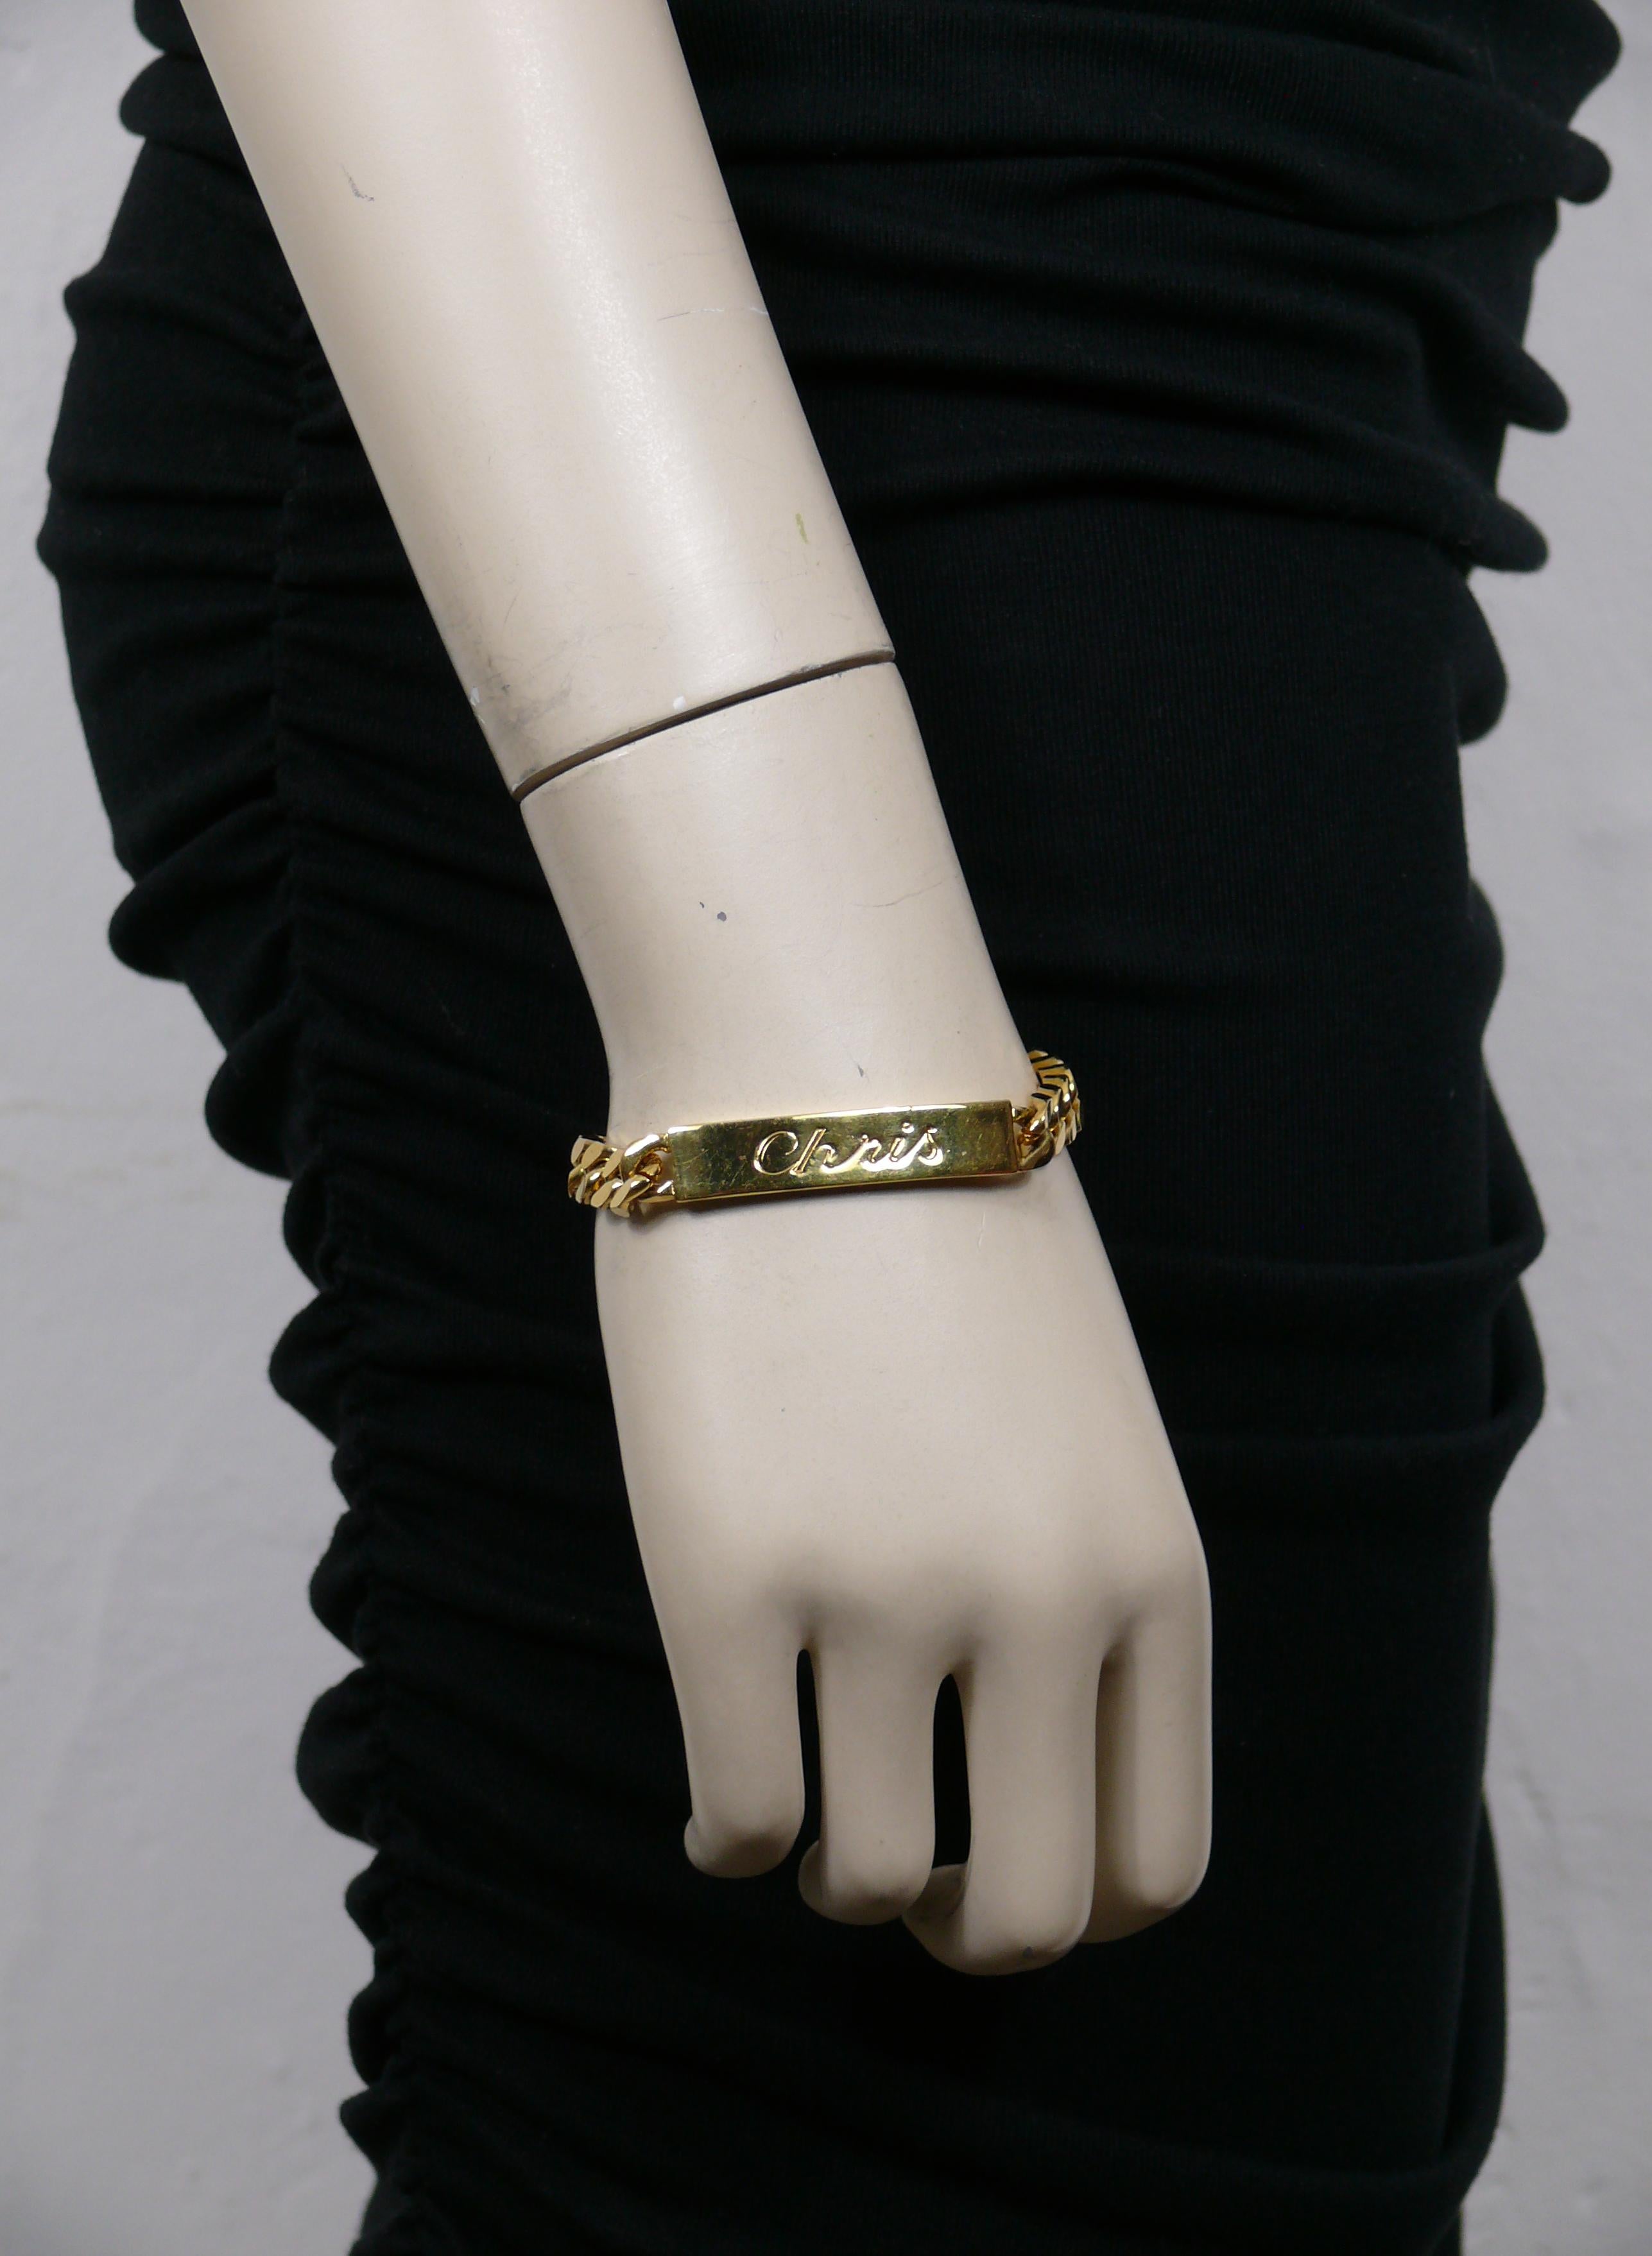 CHRISTIAN DIOR vintage gold tone bracelet featuring curb links and ID tag embossed CHRIS.

Box clasp closure.

Embossed DIOR.

Indicative measurements : length approx. 17.5 cm (6.89 inches)  / max. width approx. 0.9 cm (0.35 inch).

Materials : Gold